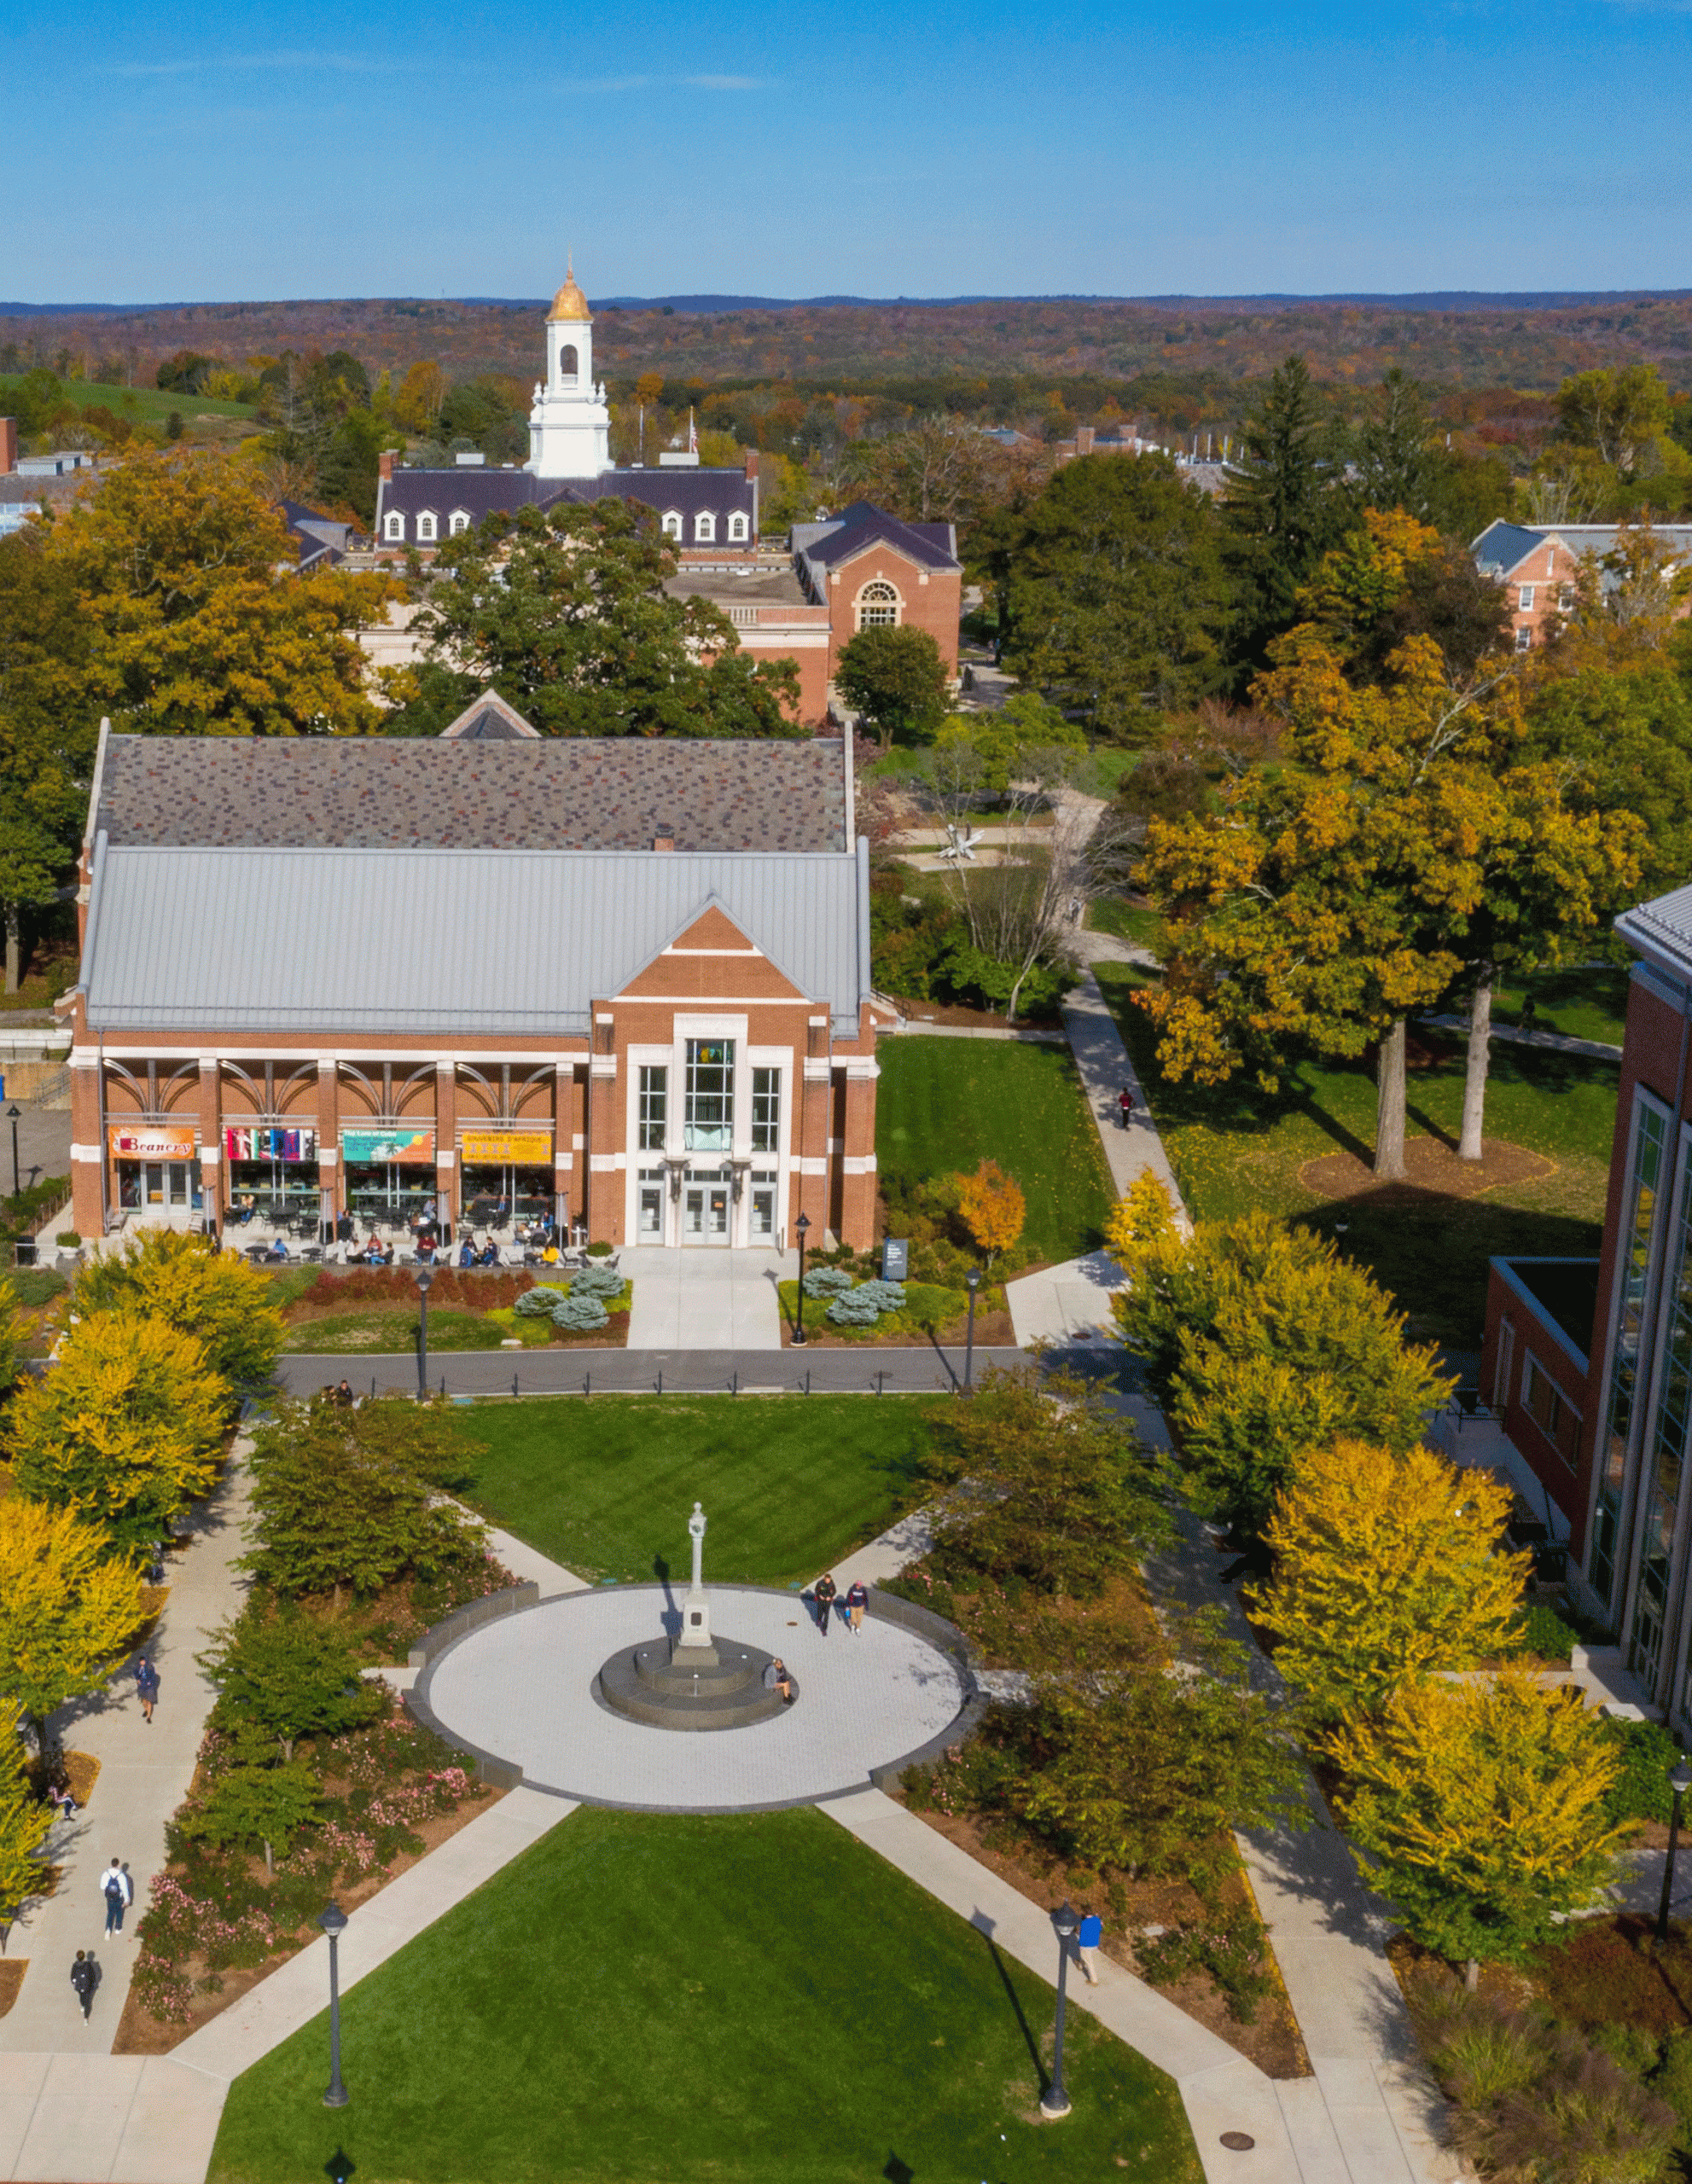 Aerial (drone) view of the Student Union Mall and Benton Museum of Art on Oct. 15, 2019. (Sean Flynn/UConn Photo)